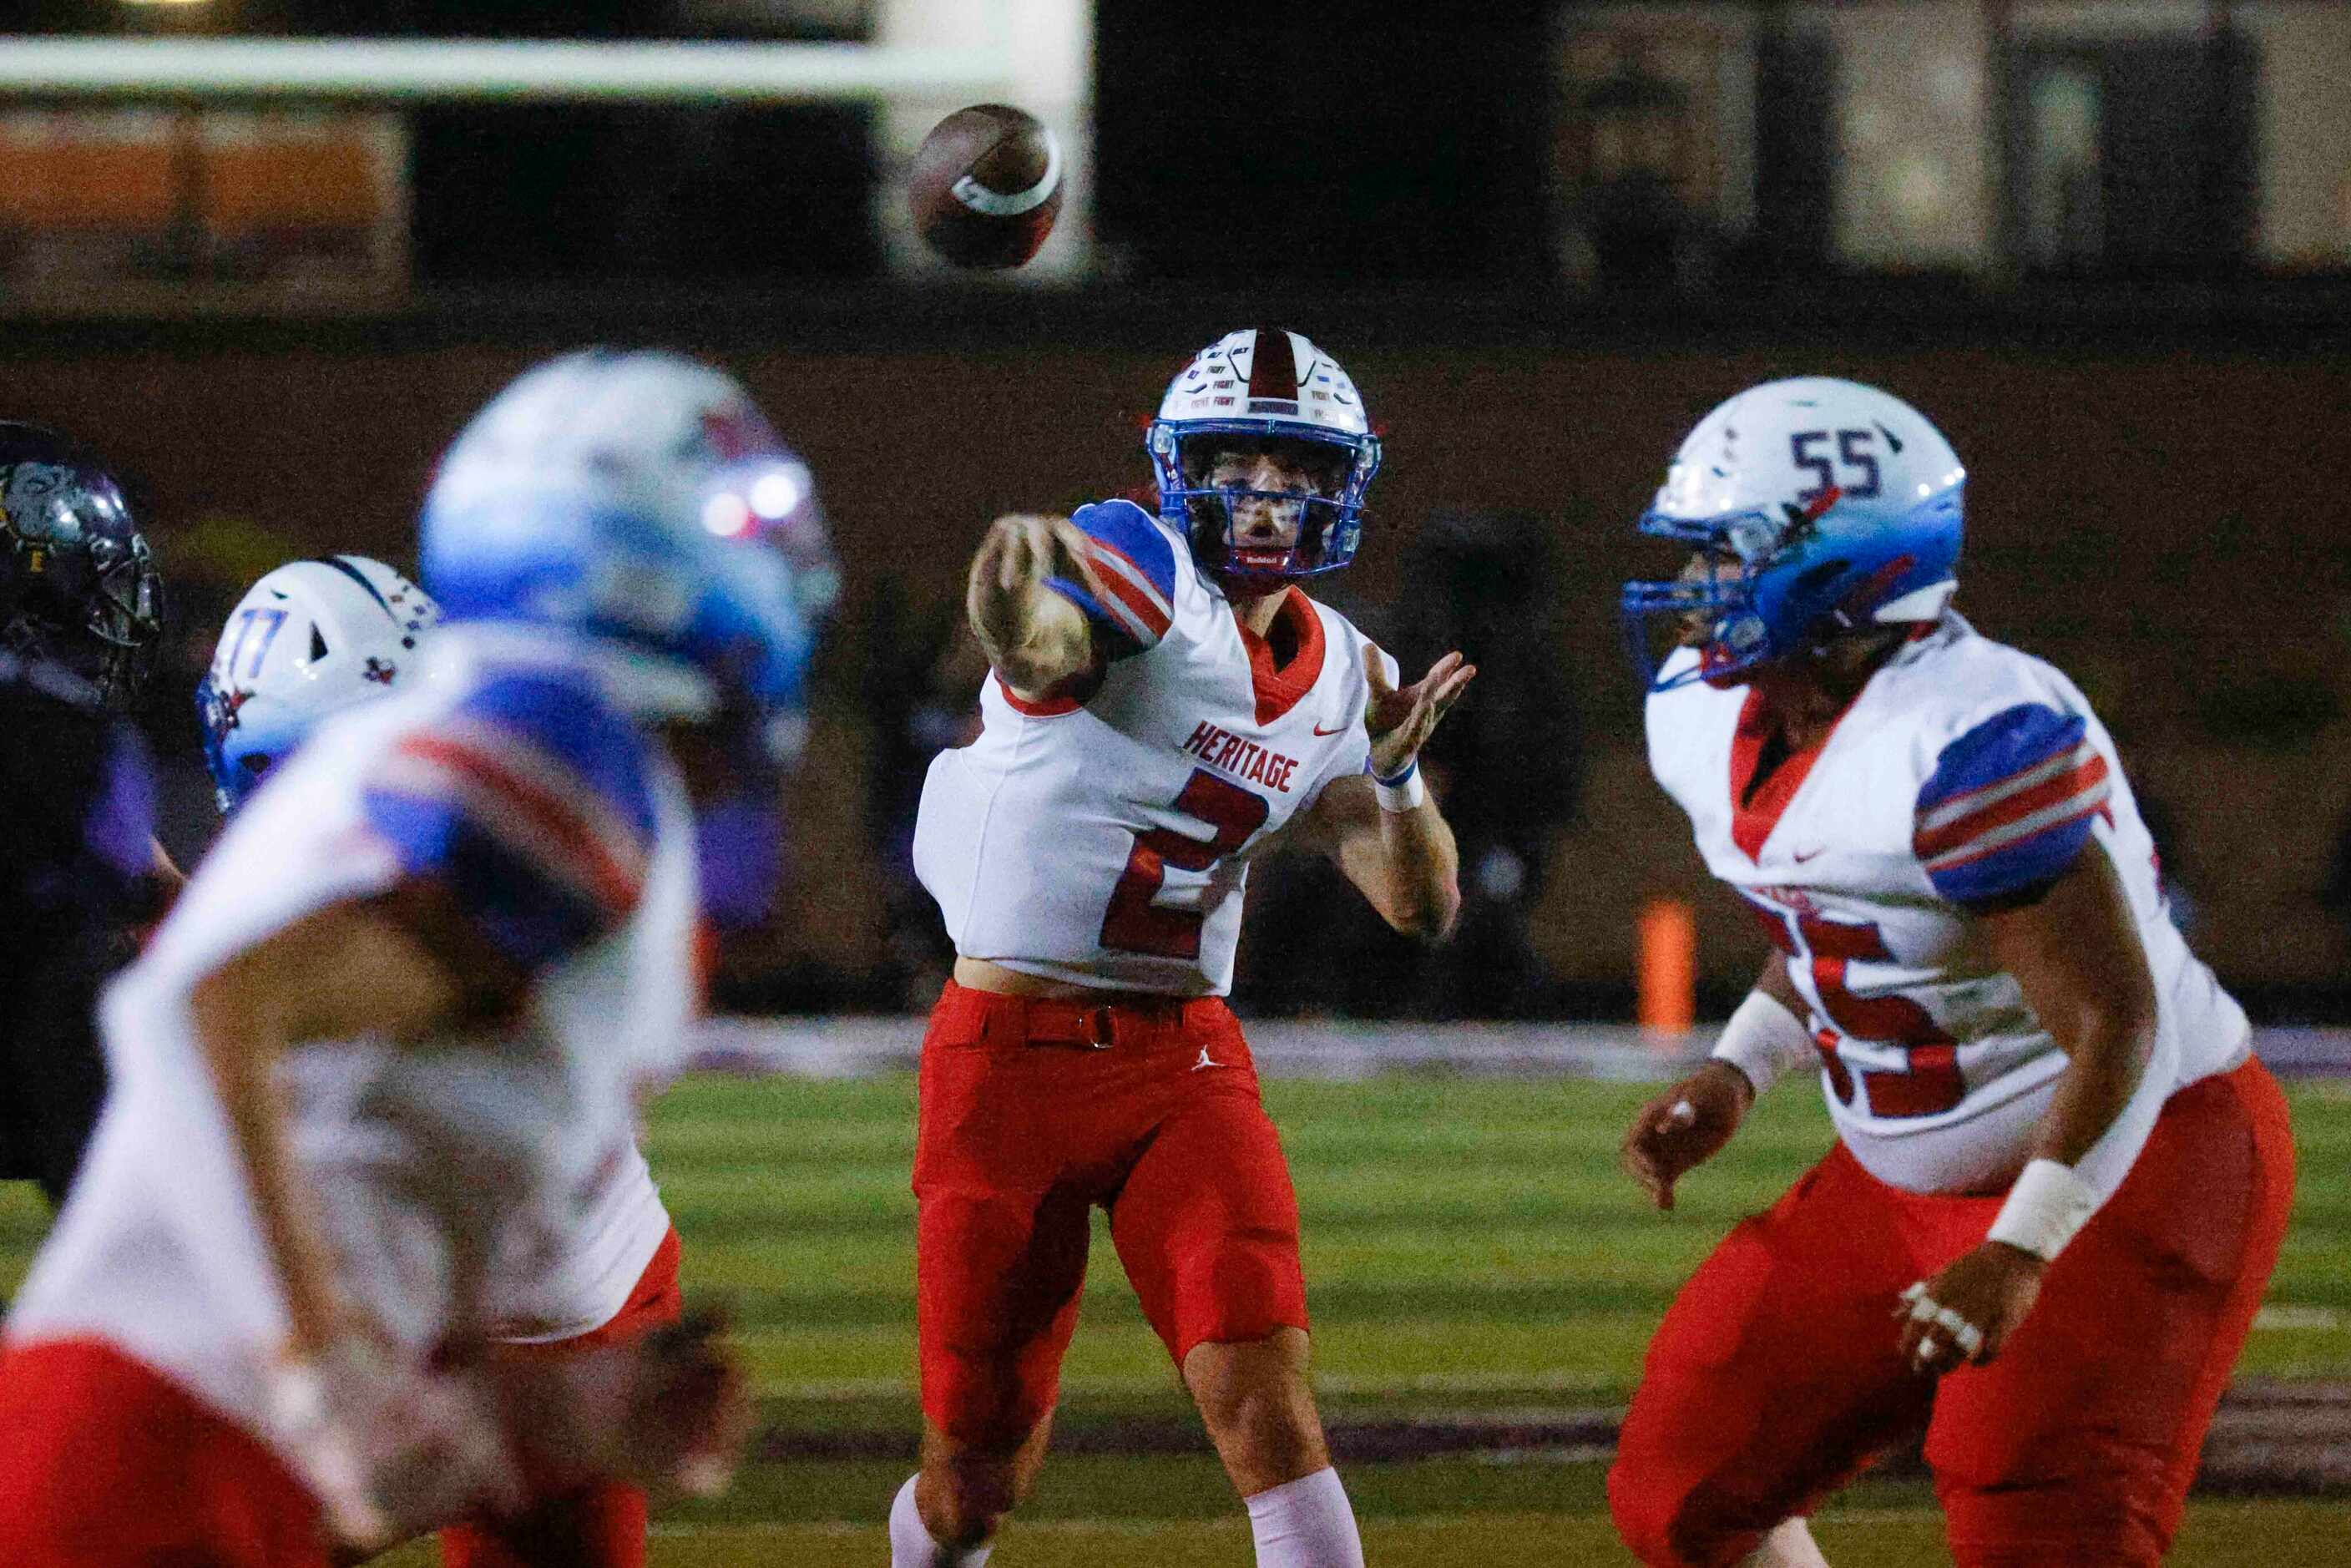 Midlothian Heritage’s QB Kaden Brown throws the ball against Everman High during the first...